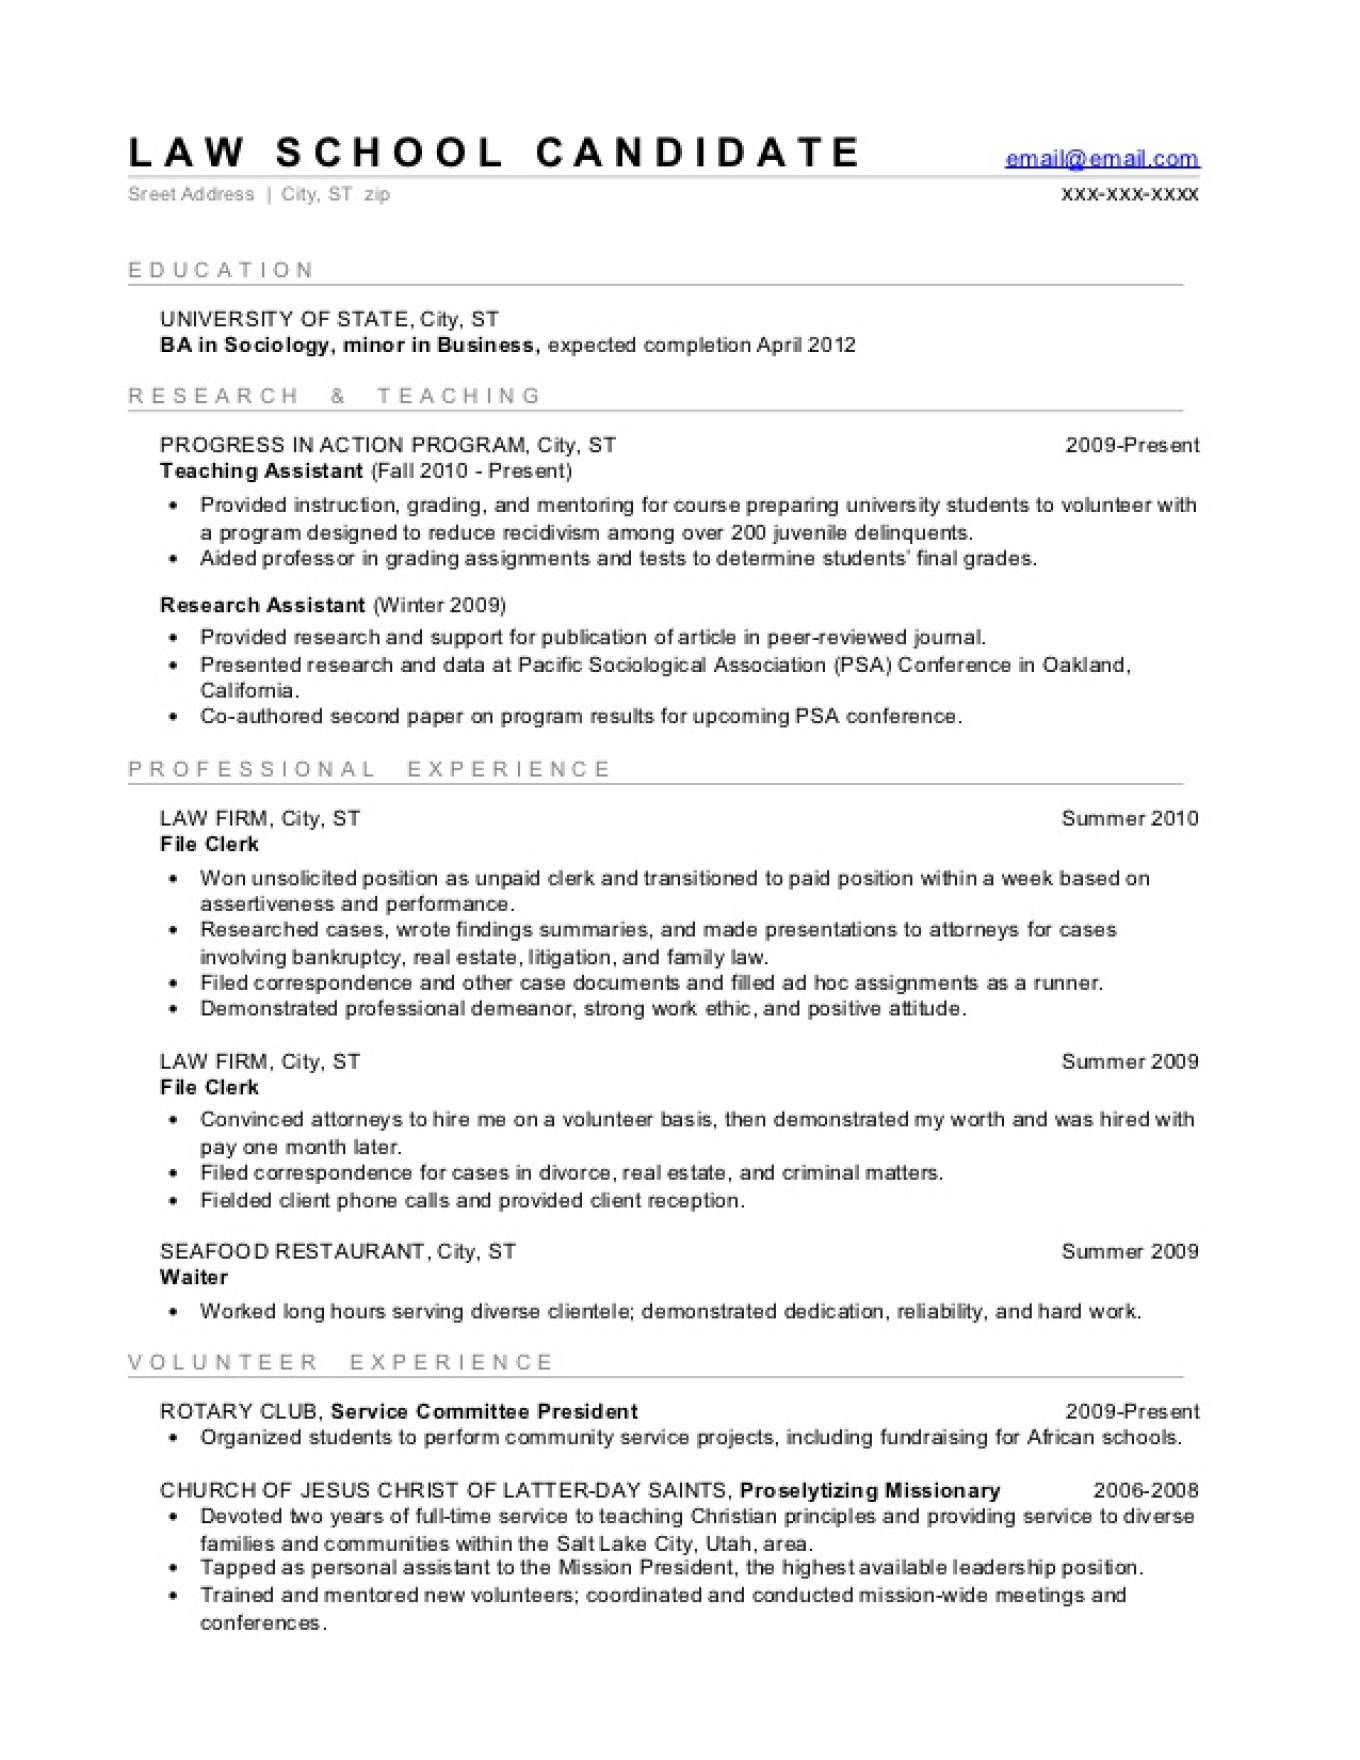 5 Law School Resume Templates Prepping Your Resume for Law School